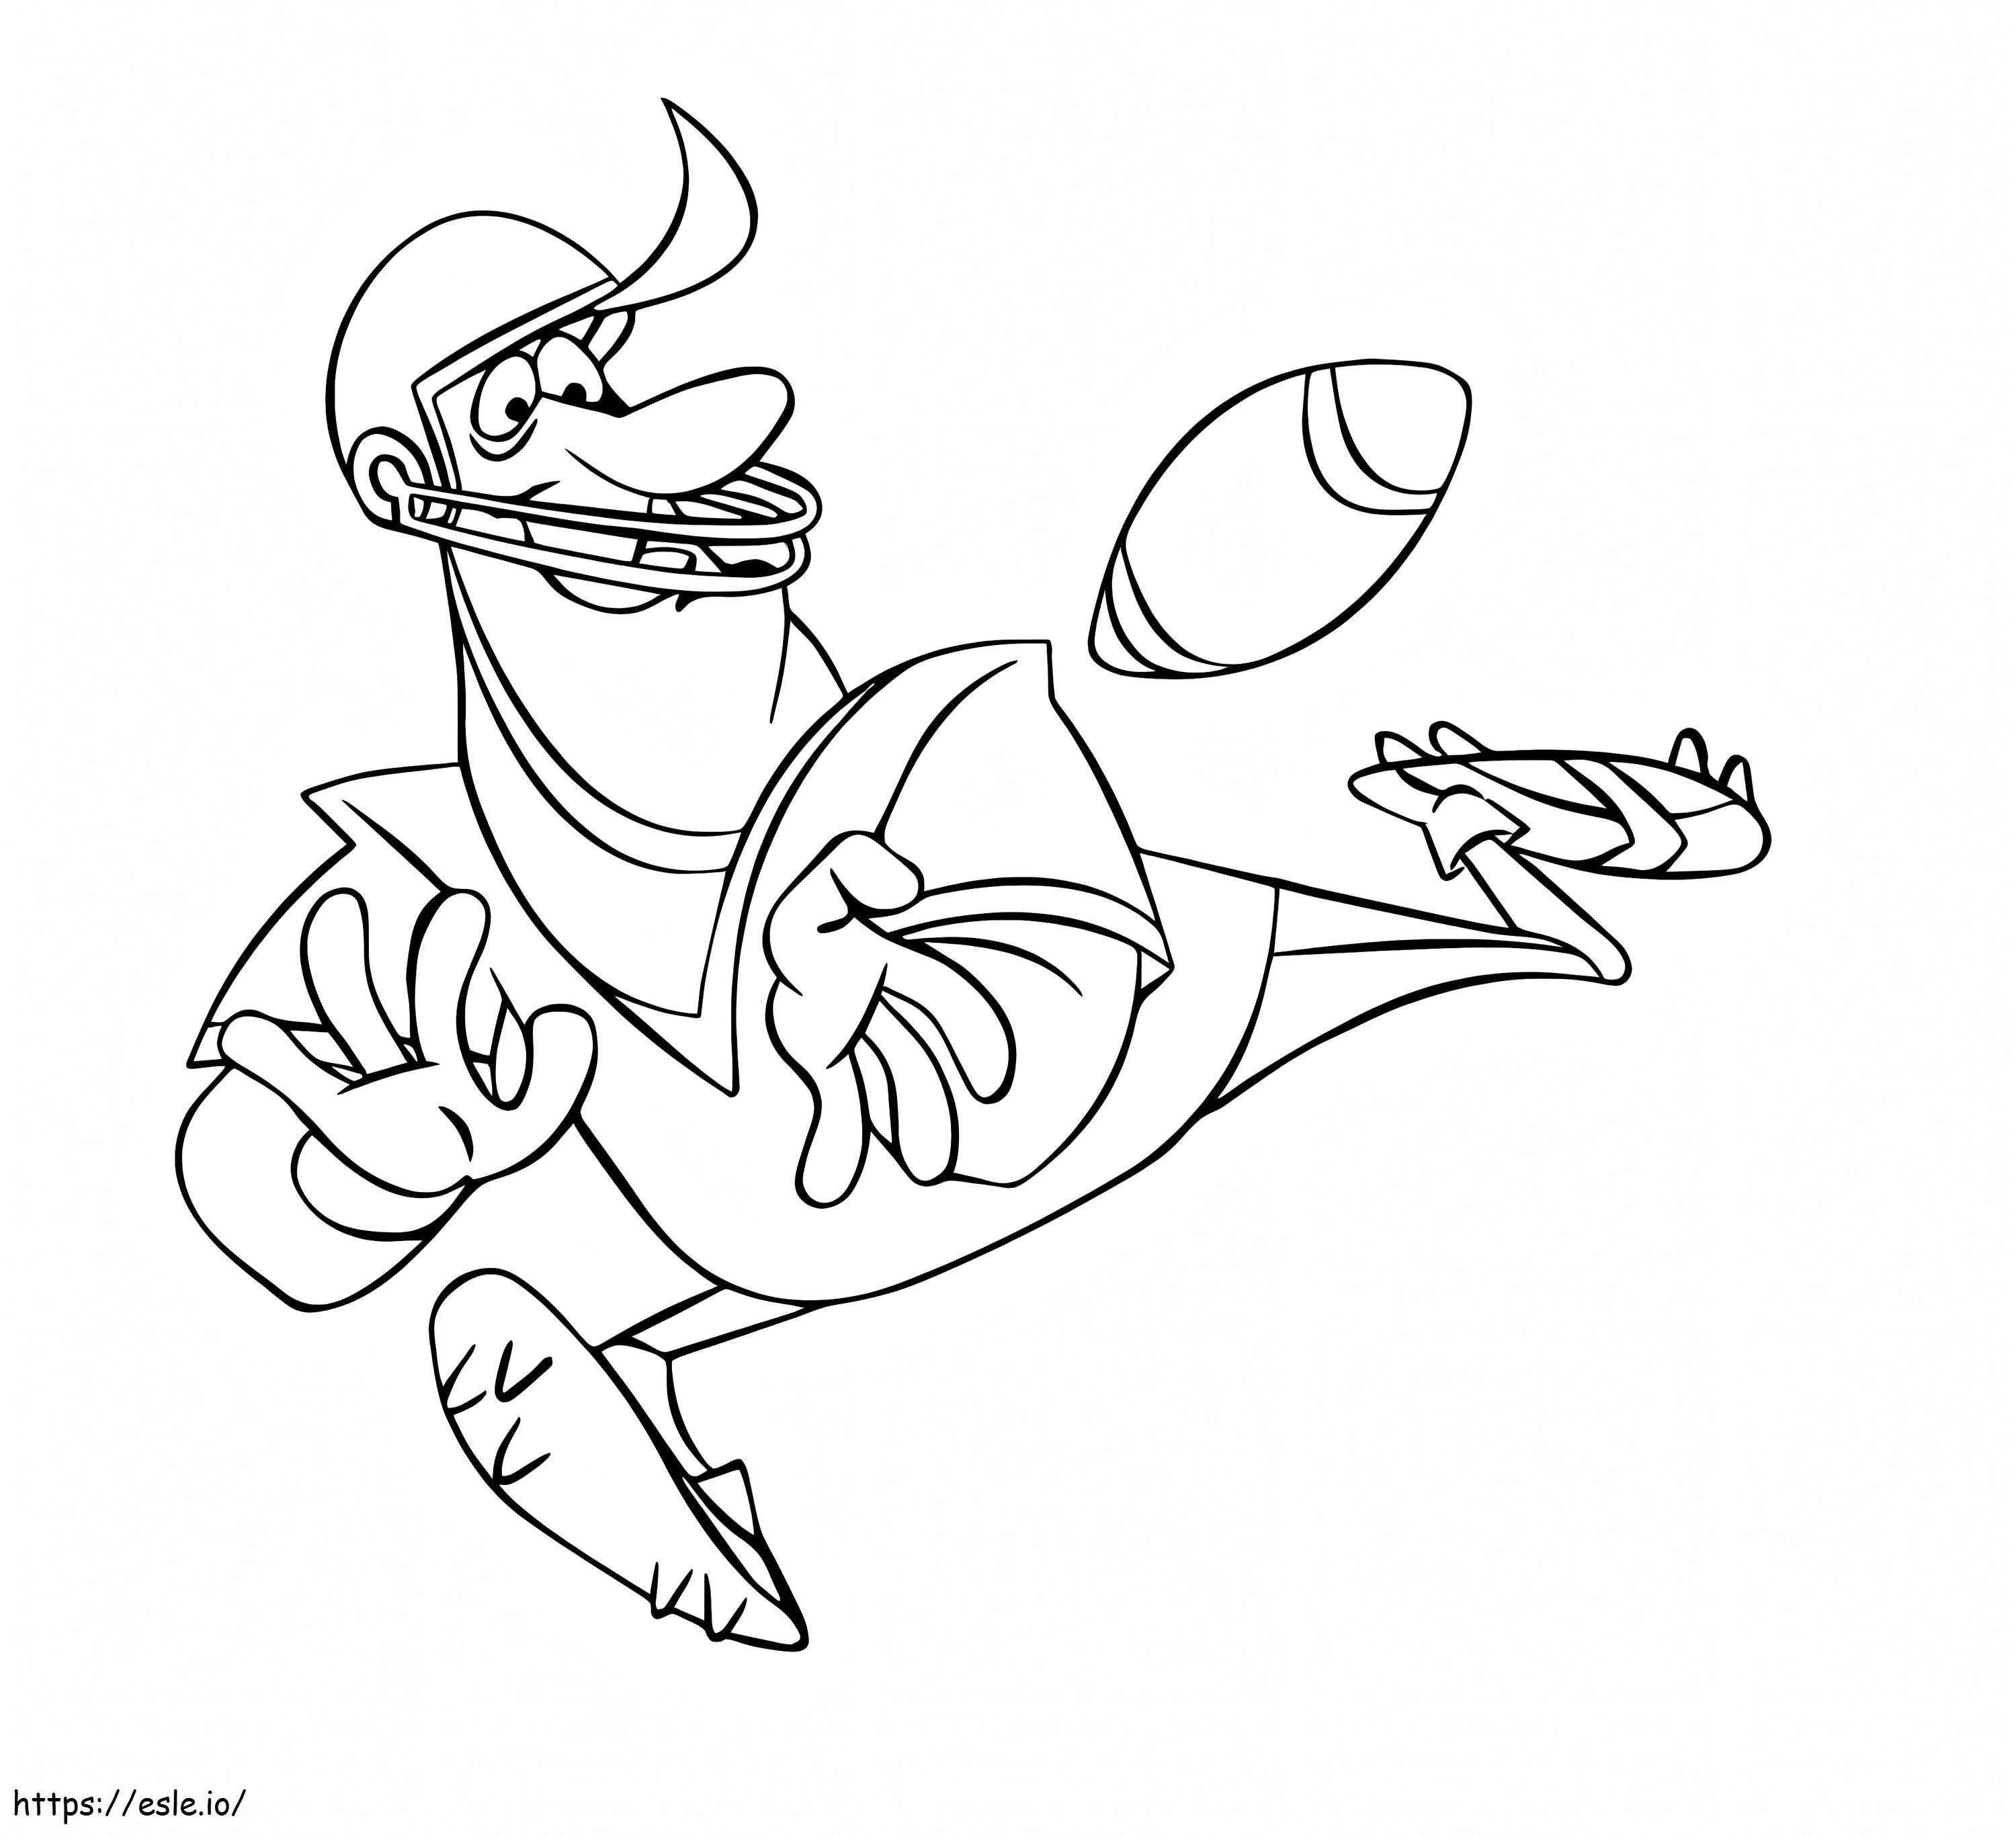 American Football Player coloring page